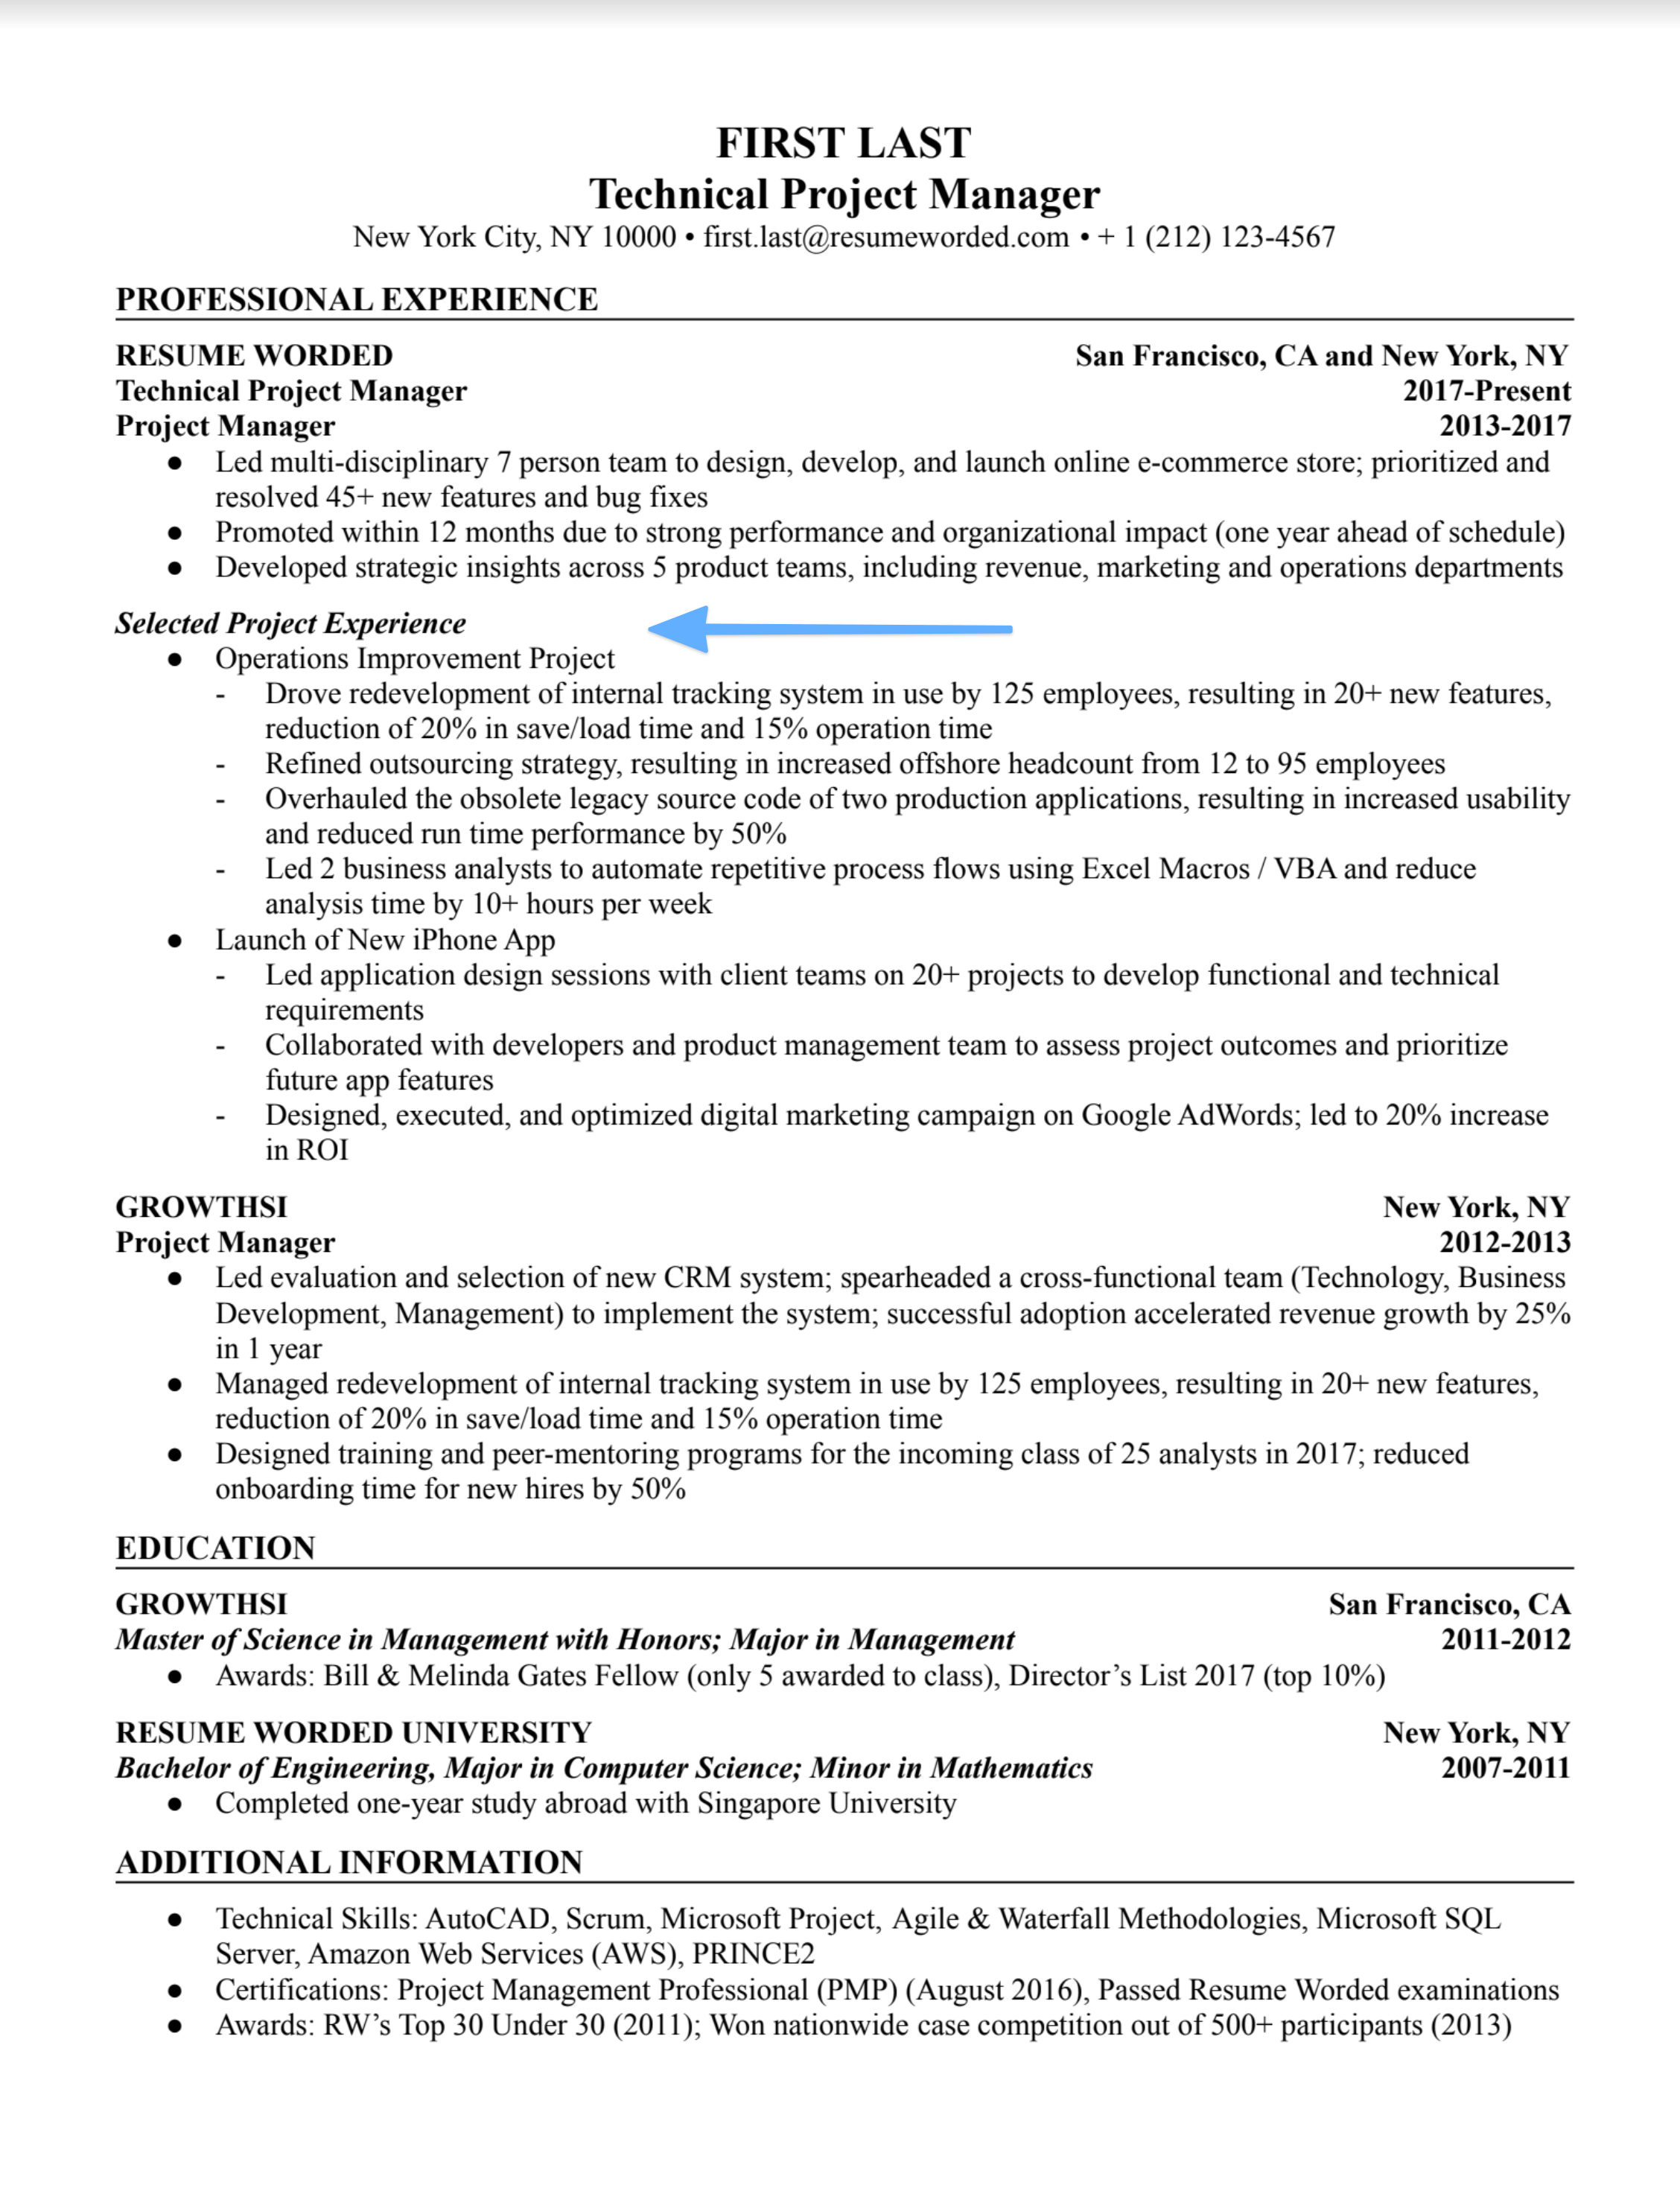 Screenshot of a CV for a Technical Project Manager position, showcasing technical skills and remote leadership abilities.